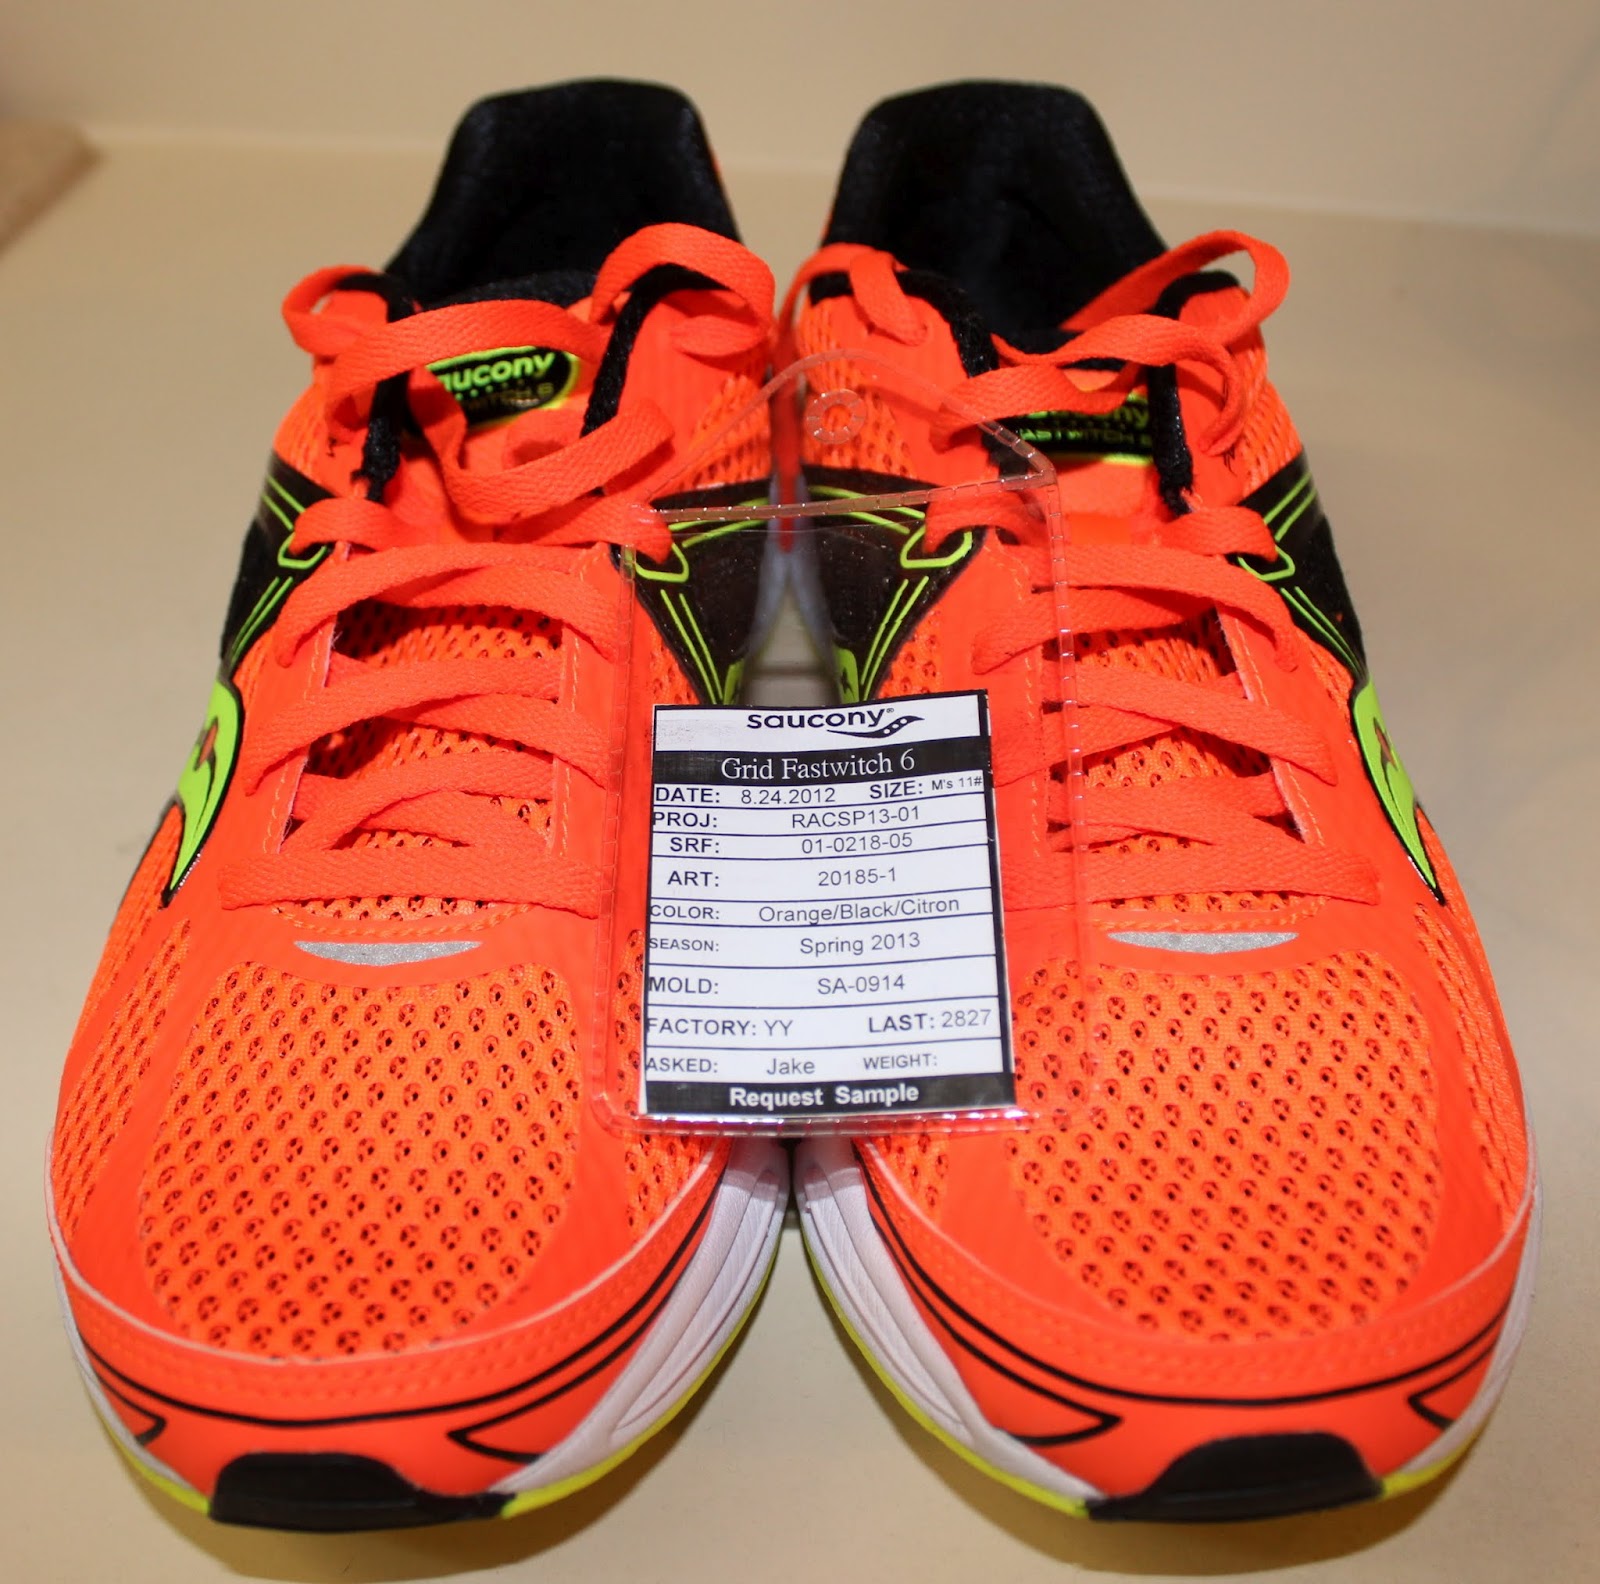 wasatch and beyond: Saucony Fastwitch 6 Sneak Peak